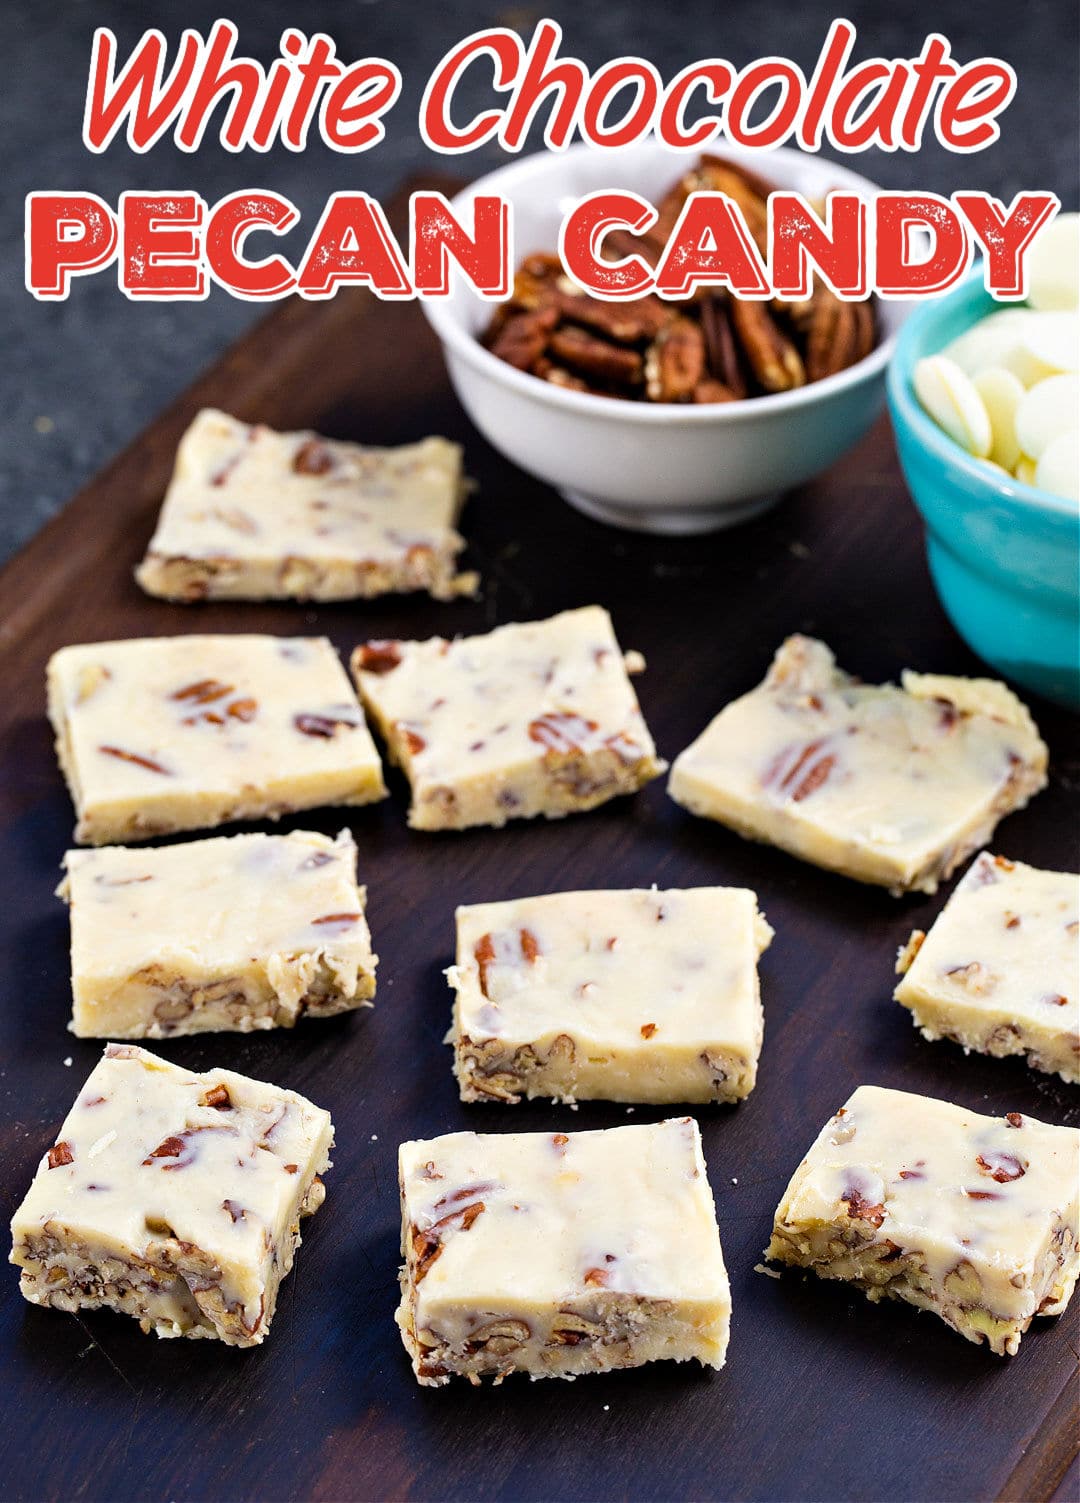 White Chocolate Pecan Candy squares on wooden board.